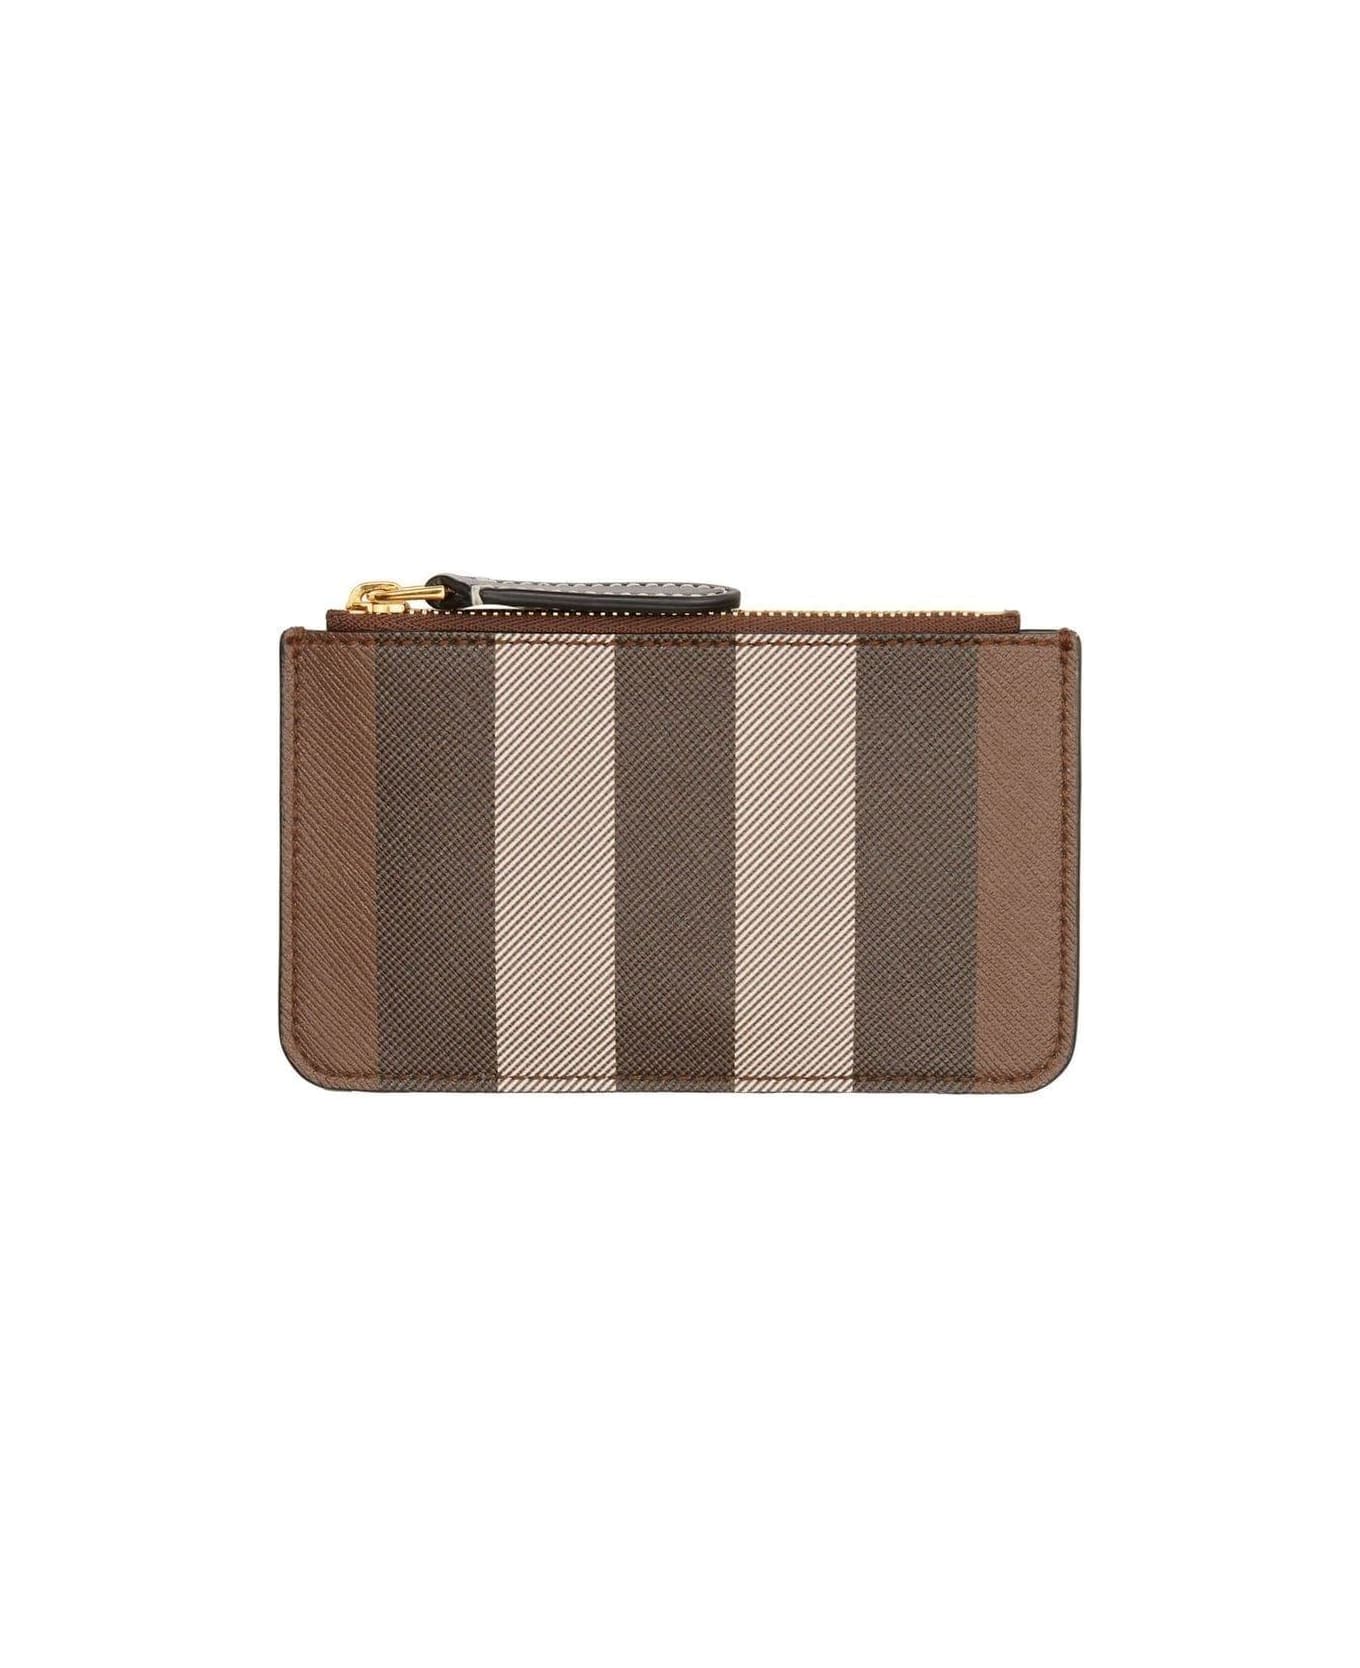 Burberry Striped Zipped Wallet - Brown 財布